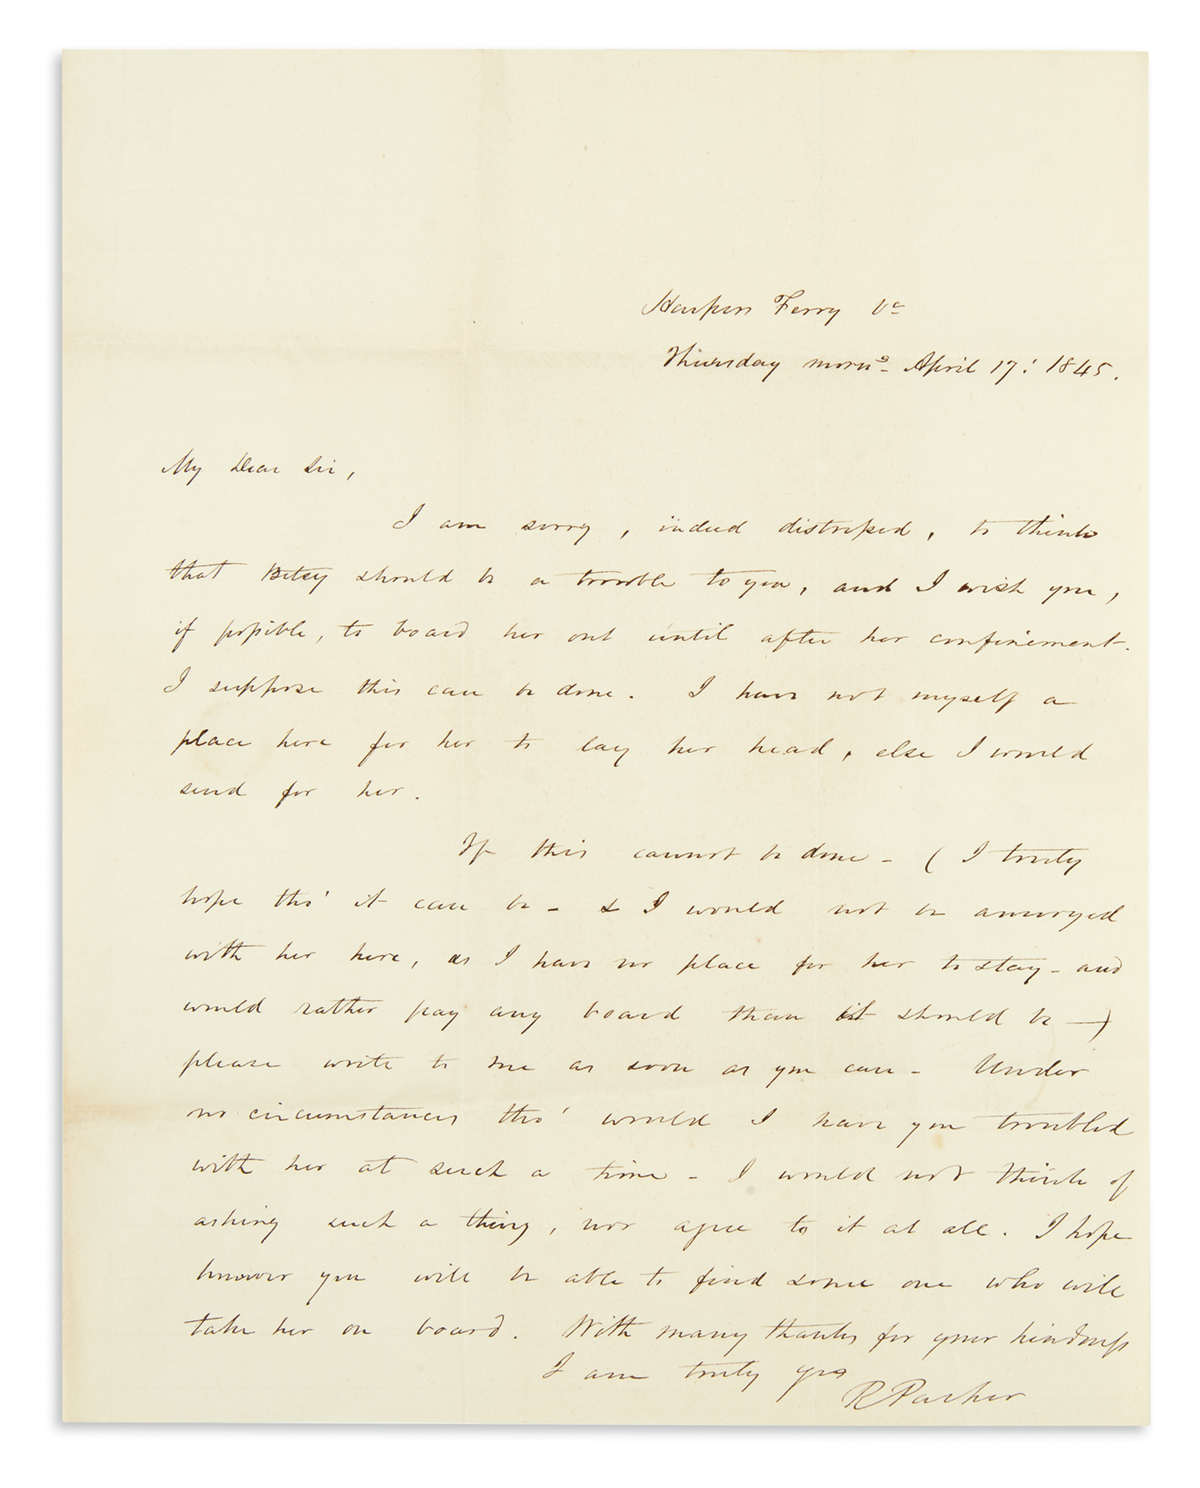 (SLAVERY AND ABOLITION.) Parker, Richard. Group of letters discussing his slaves, and recommending him for his judgeship.